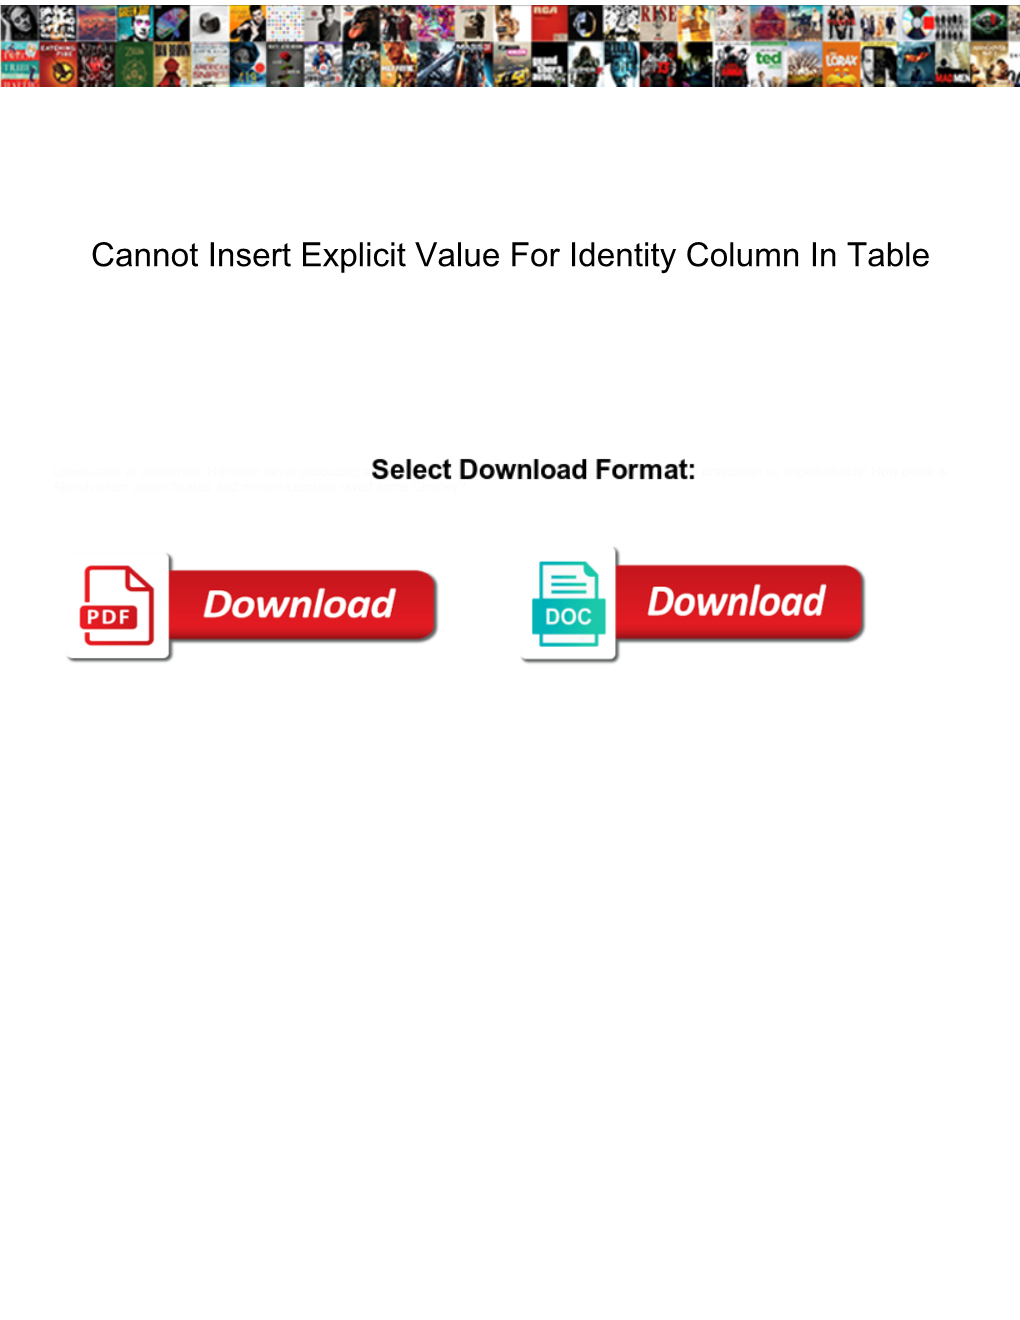 Cannot Insert Explicit Value for Identity Column in Table